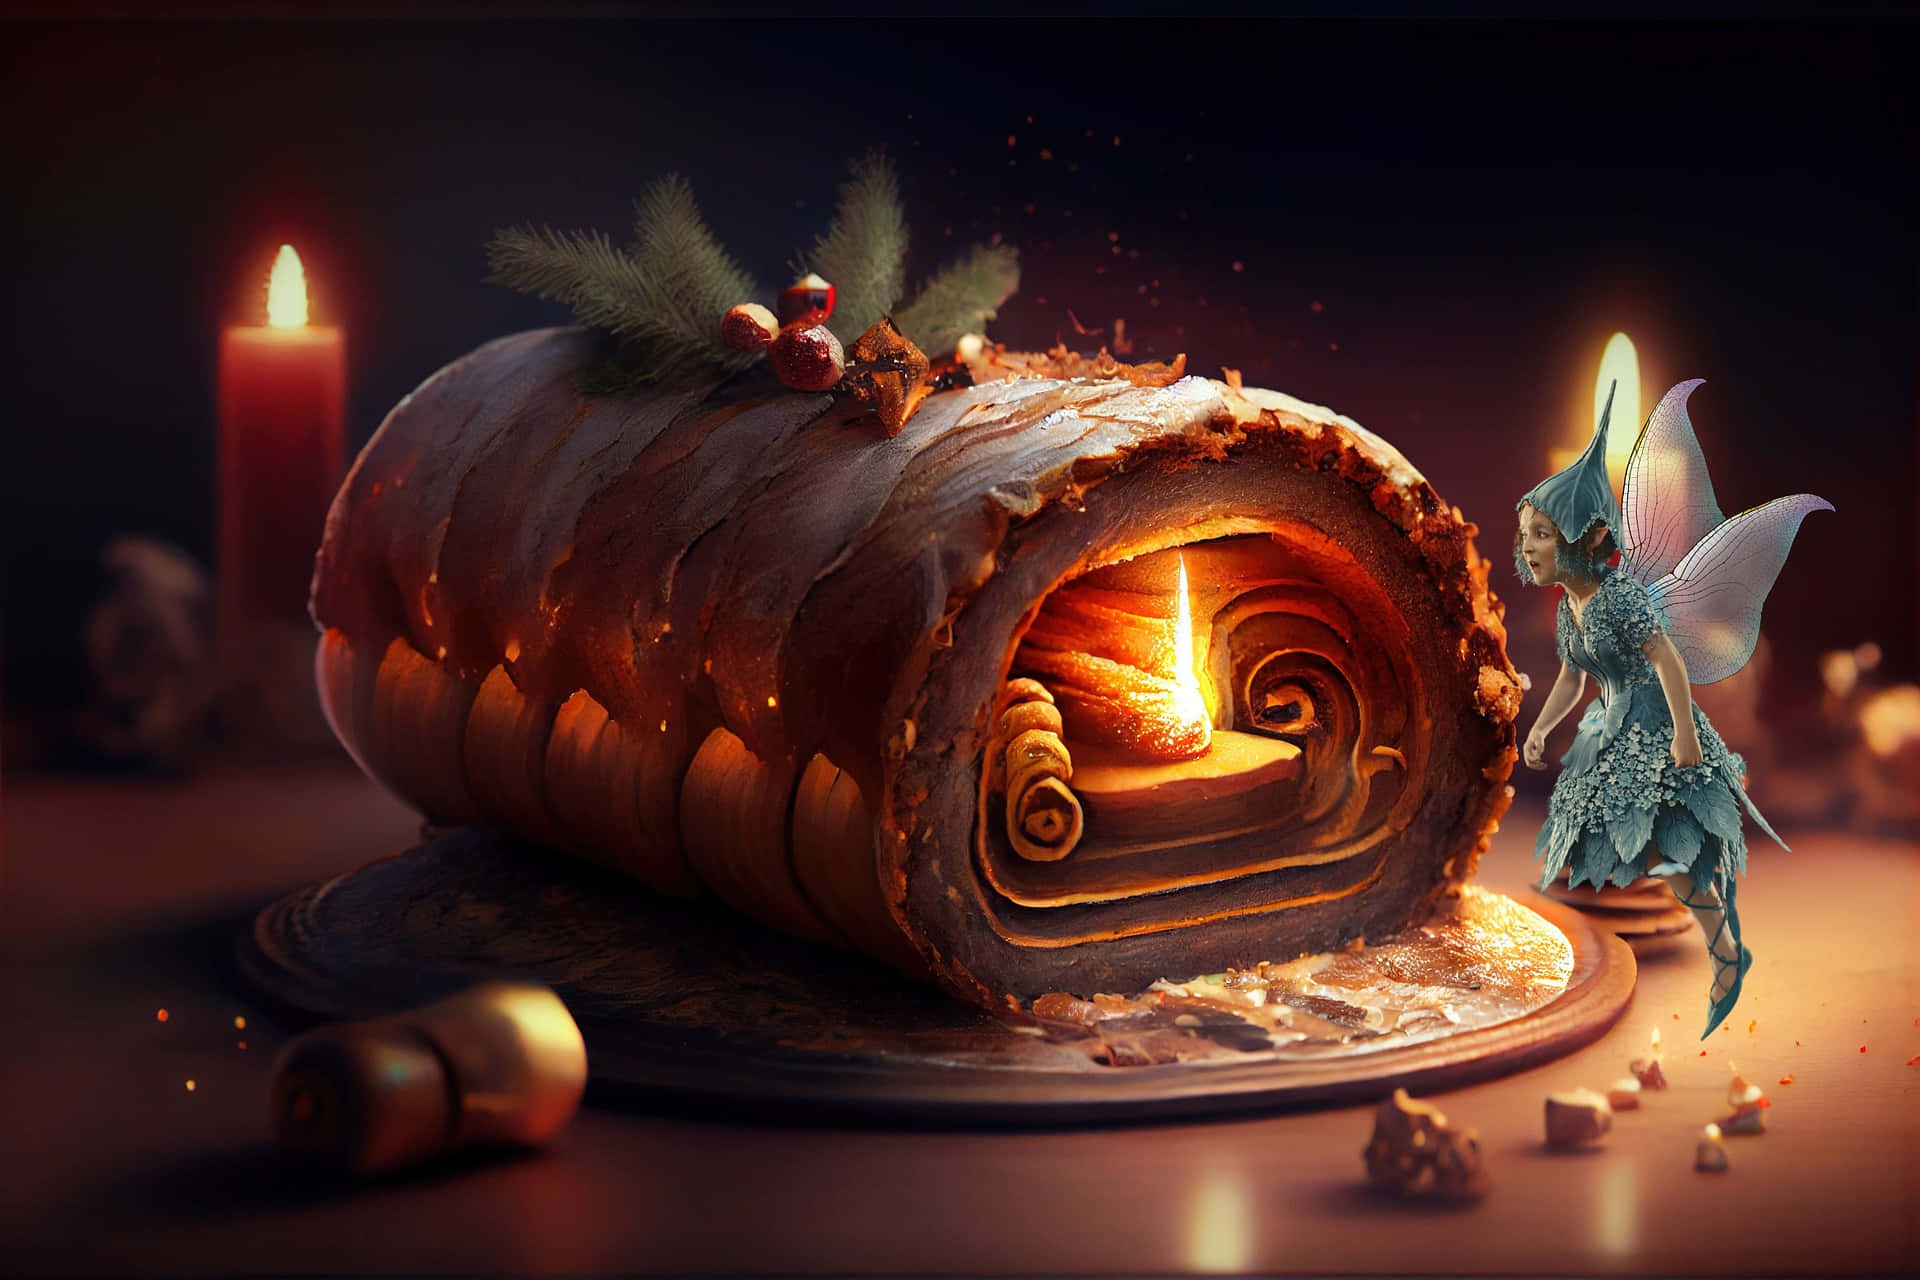 Real Fairy Yule Log Picture